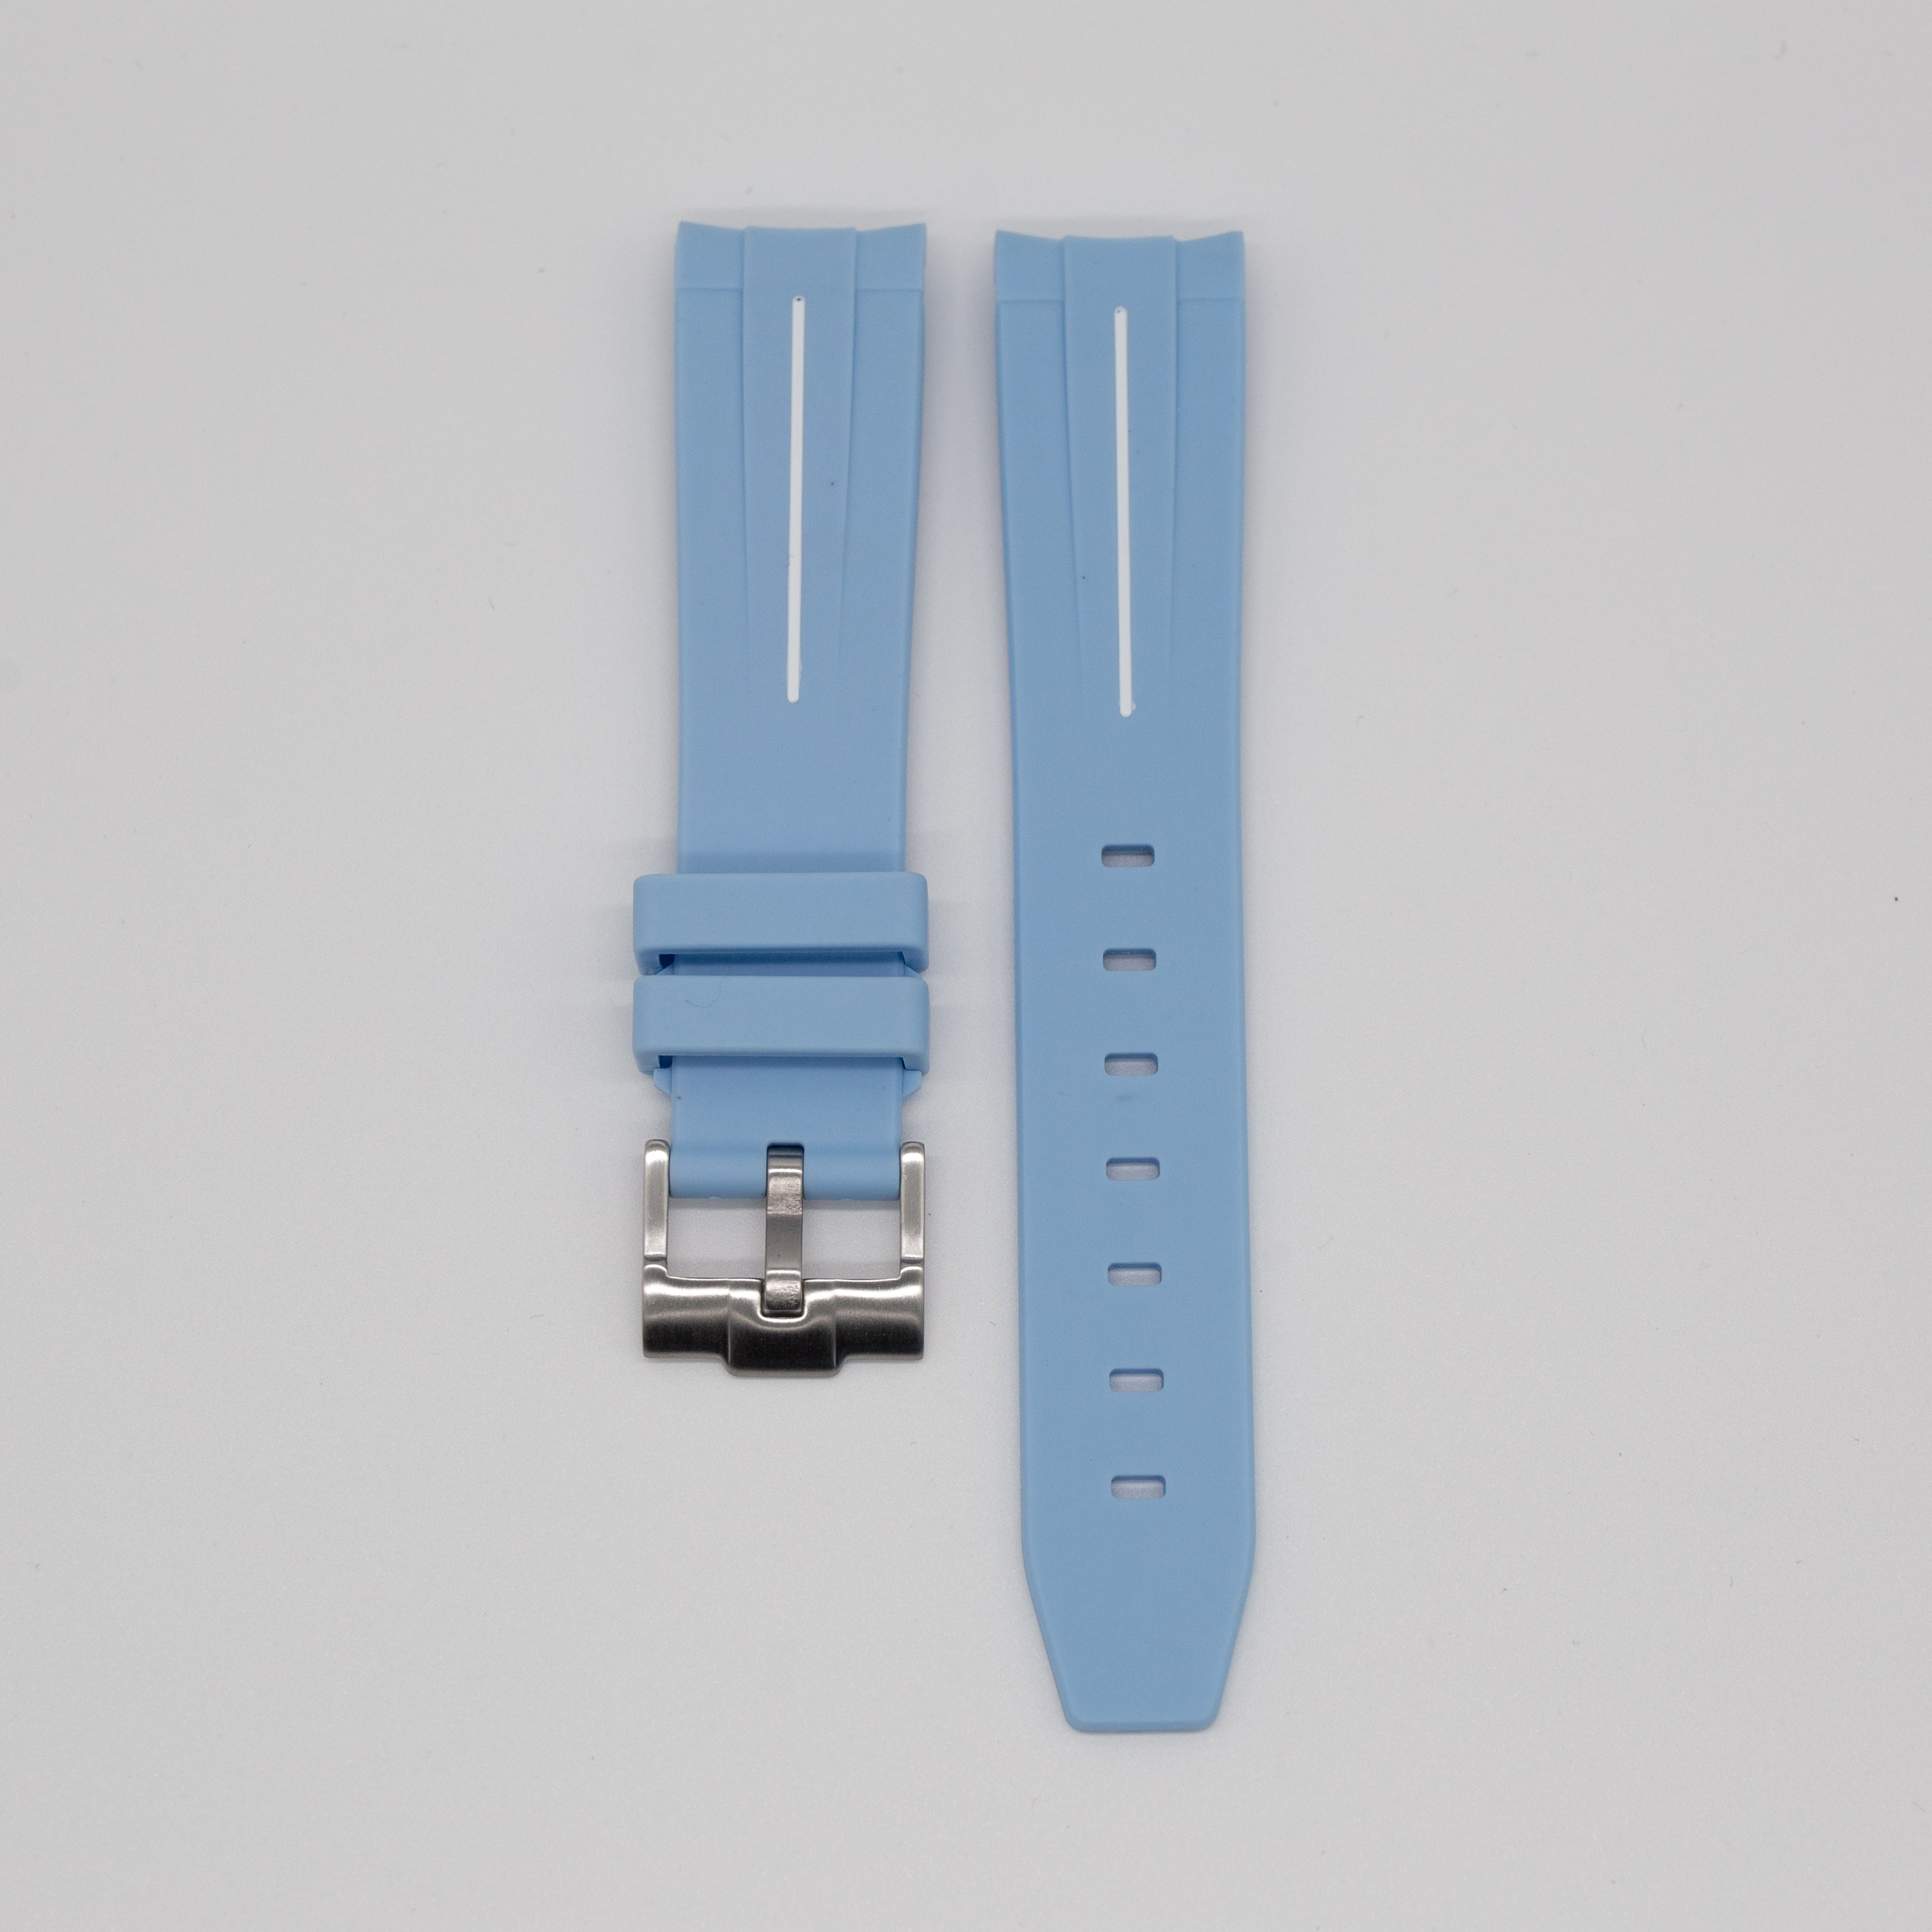 MoonSwatch Luxury Strap Sky Blue "White Accent"